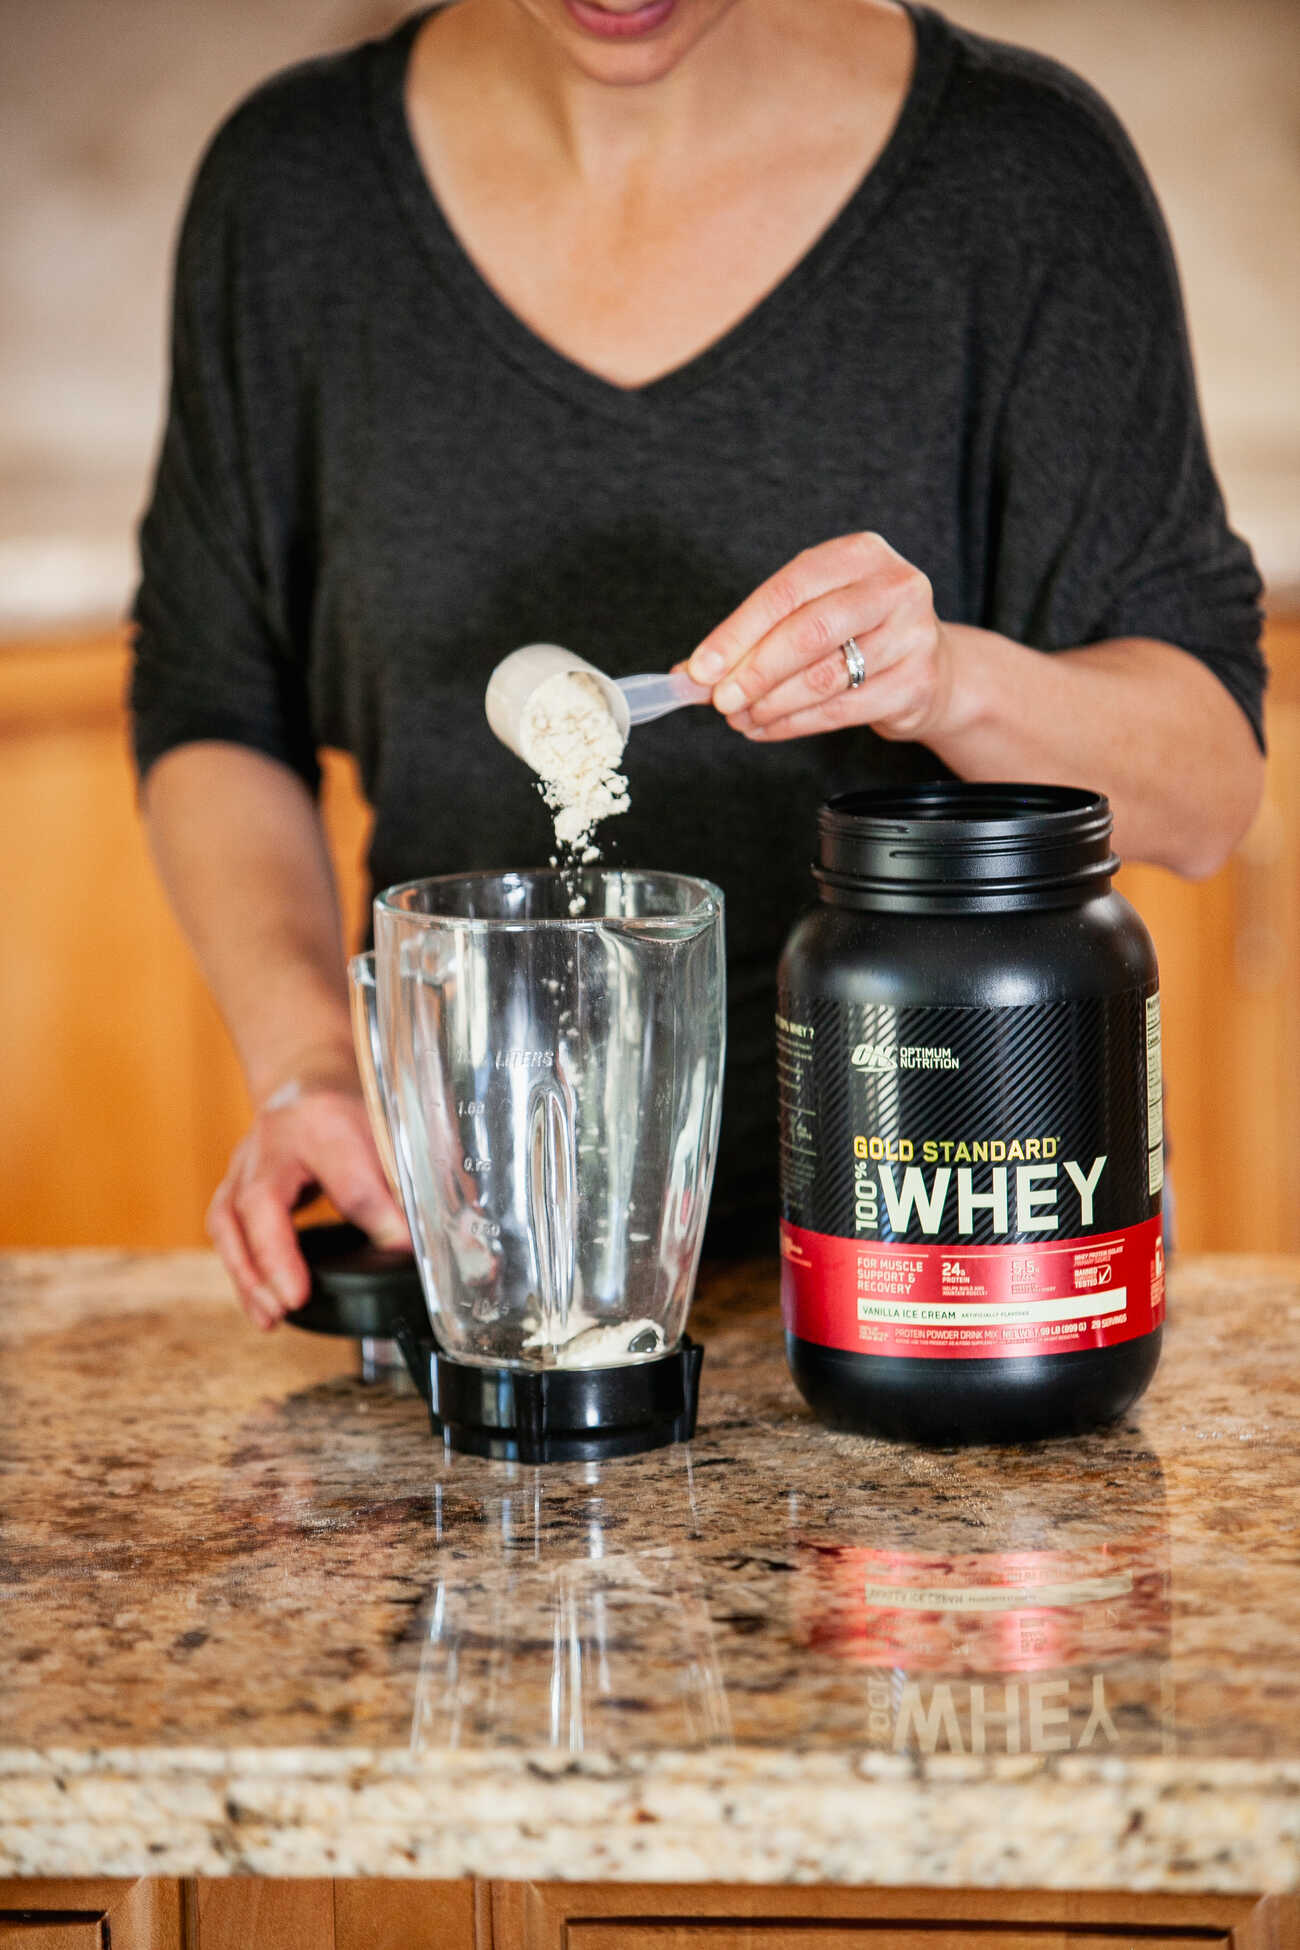 Woman in a black top scooping vanilla ice cream flavored Gold Standard Whey Protein powder into a blender on a kitchen counter